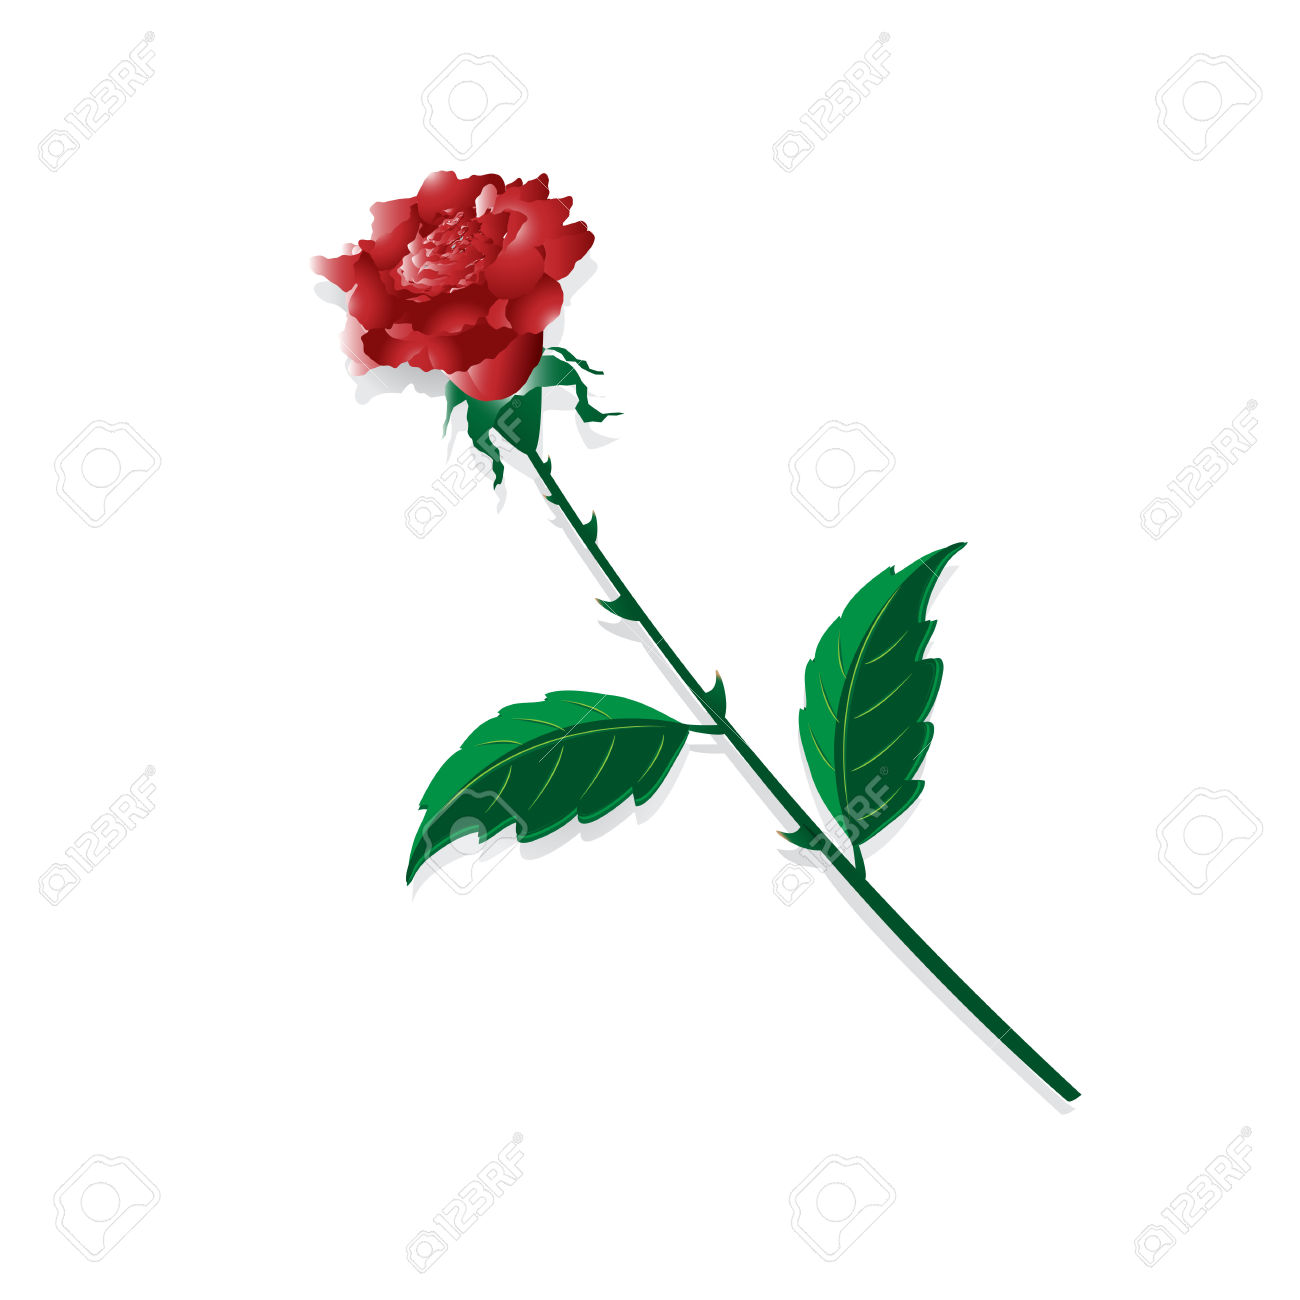 Flower Of The Rose With Thorn On White Background Royalty Free.